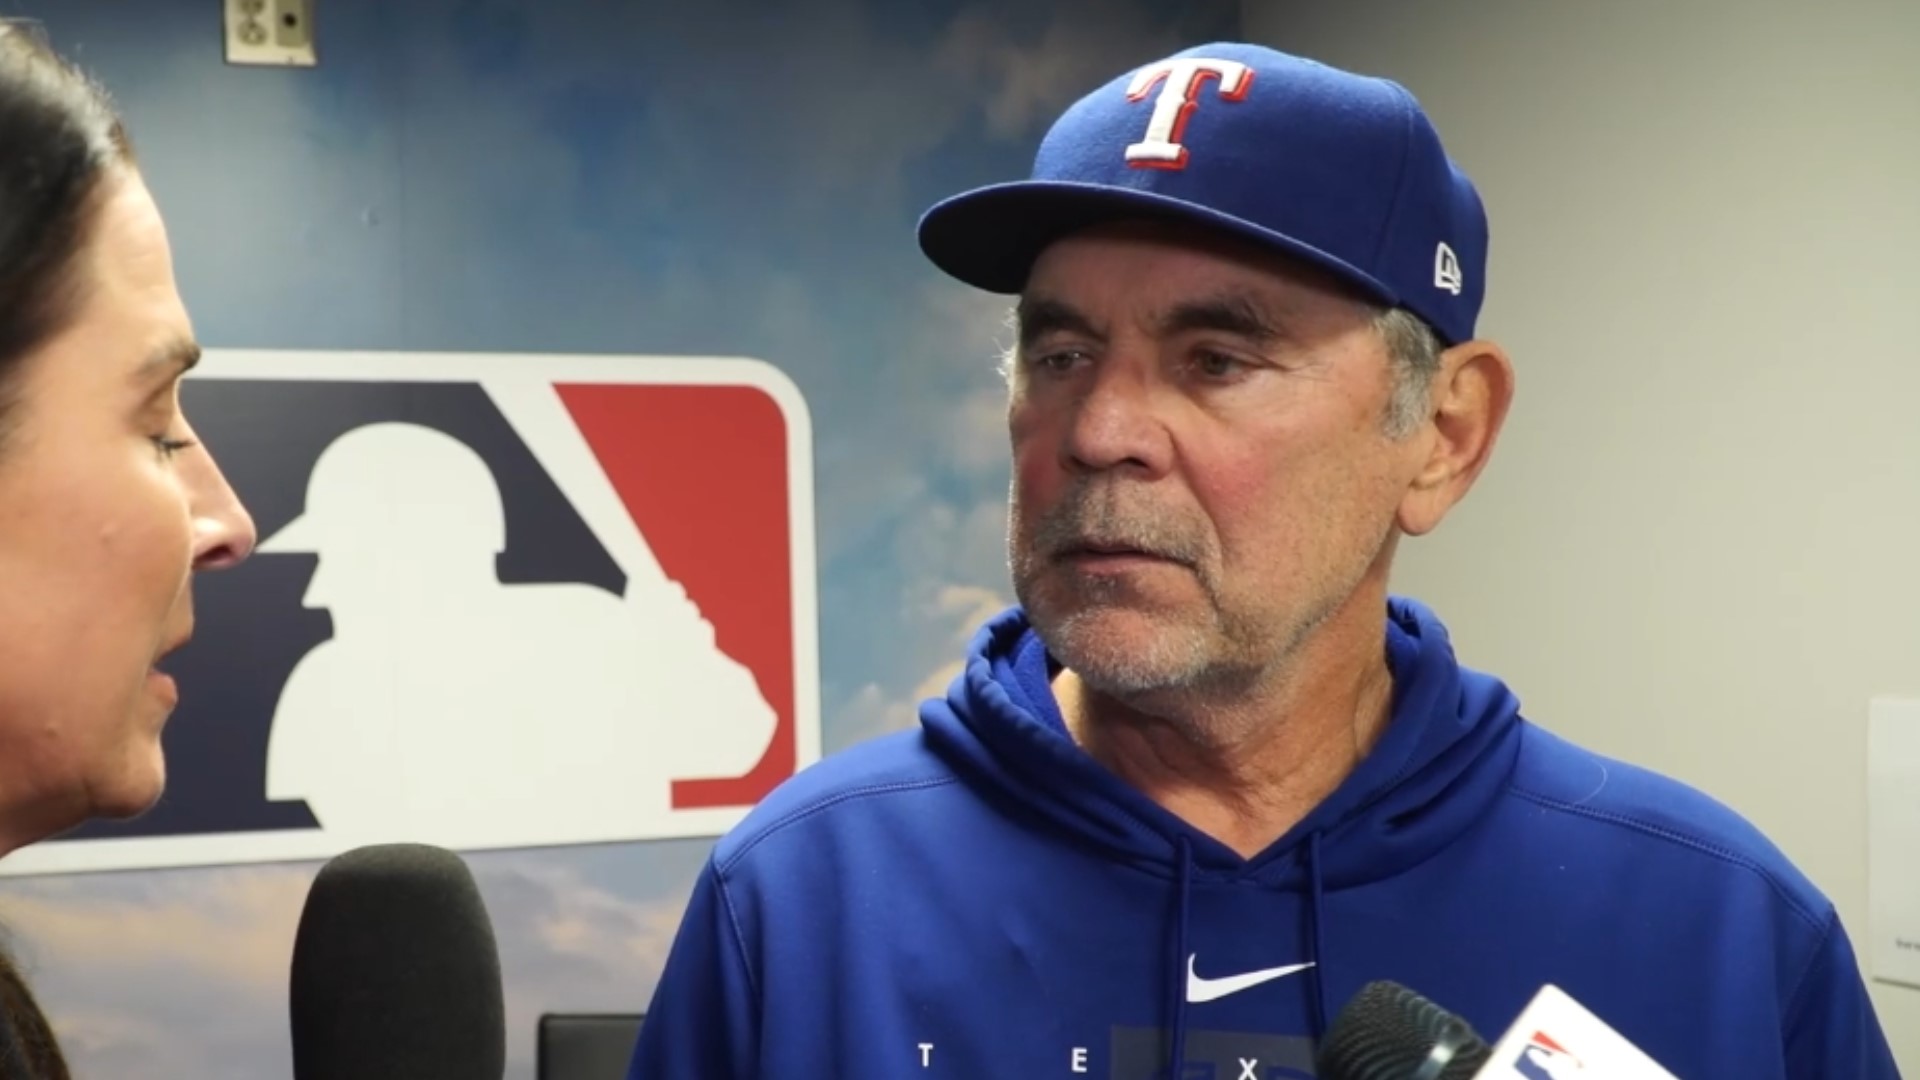 Texas Rangers manager Bruce Bochy joined Bally Sports Southwest for a postgame recap after Texas' big win Wednesday night.